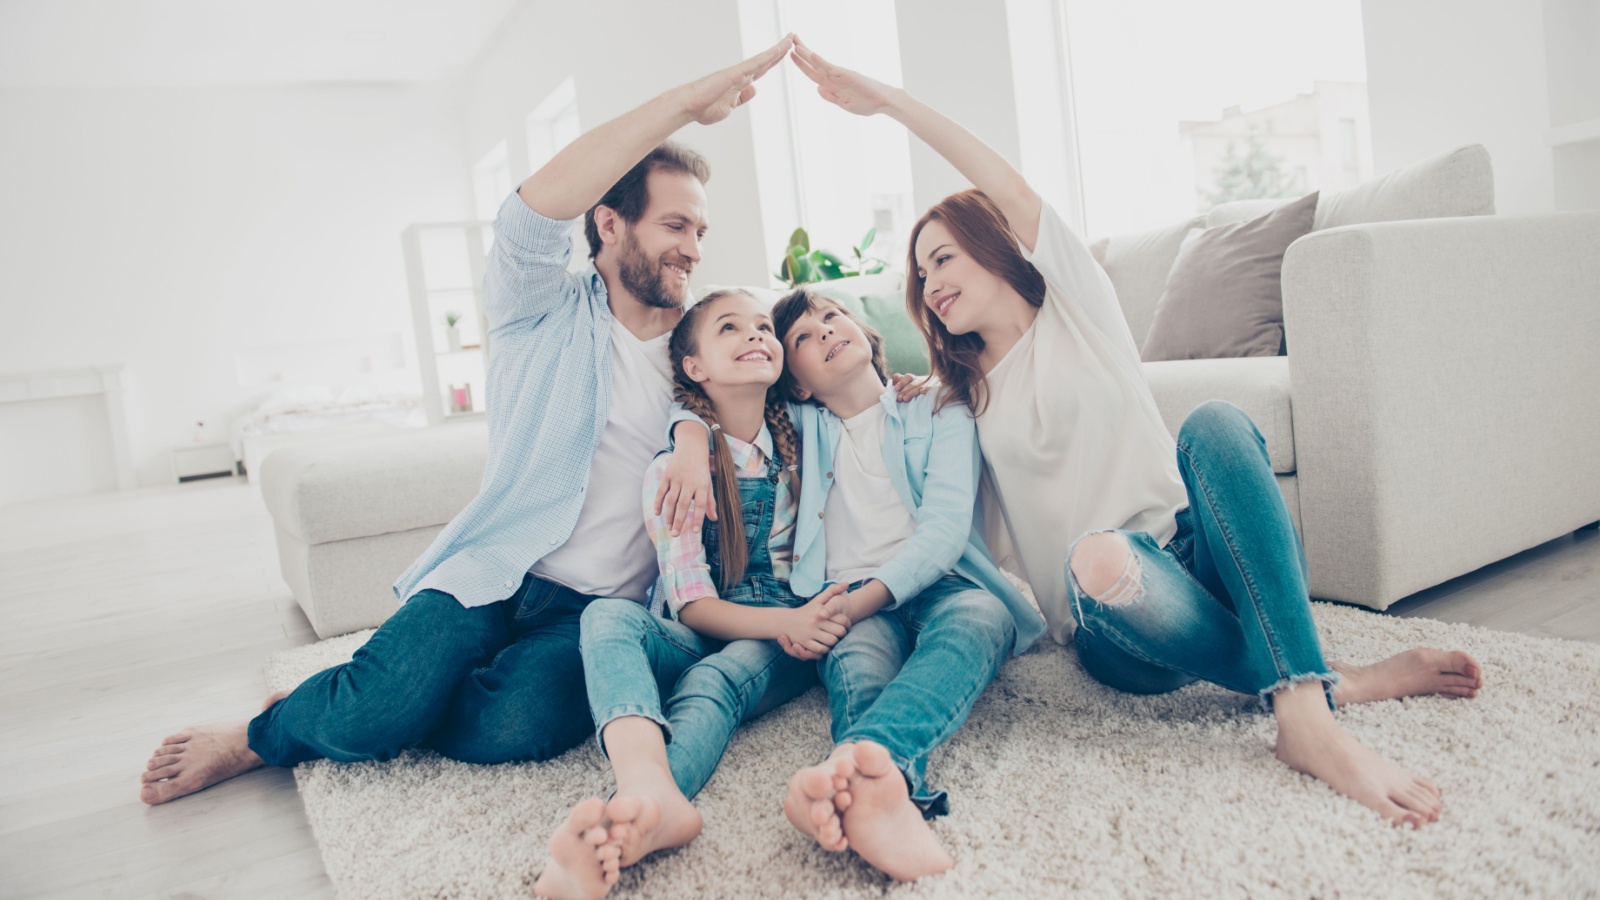 Stylish full family with two kids sitting on carpet, mom and dad making roof figure with hands arms over heads